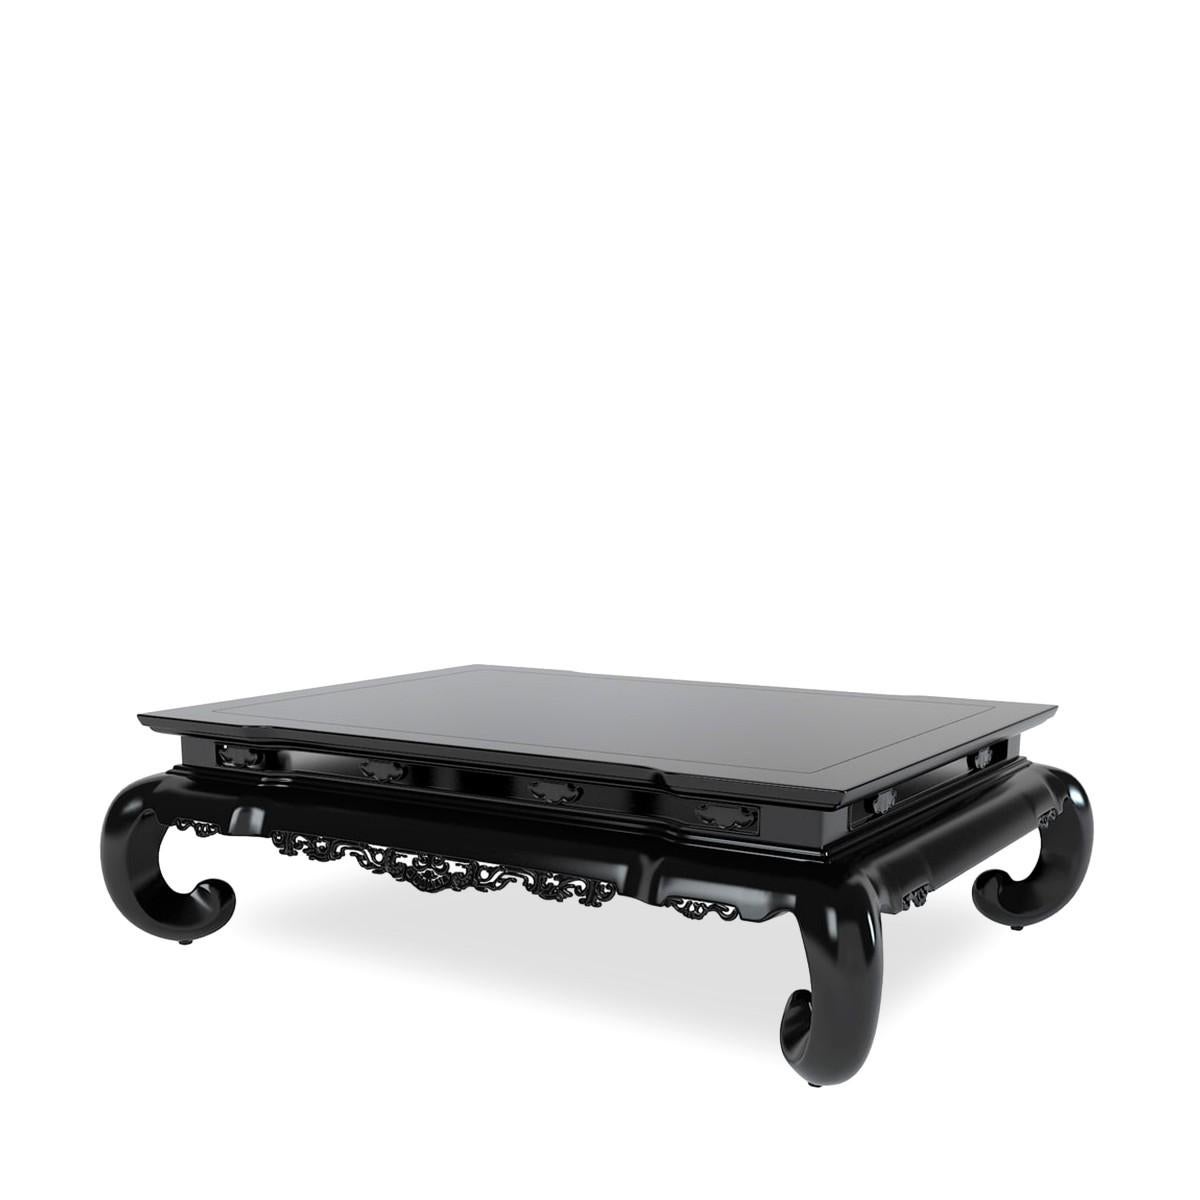 The Beekman cocktail table in black lacquer finish by Ralph Lauren Home collection. Finely crafted of Philippine mahogany solids with Philippine mahogany veneer. Imported, circa 2010. 
Features rectangular top and carved design in the Asian